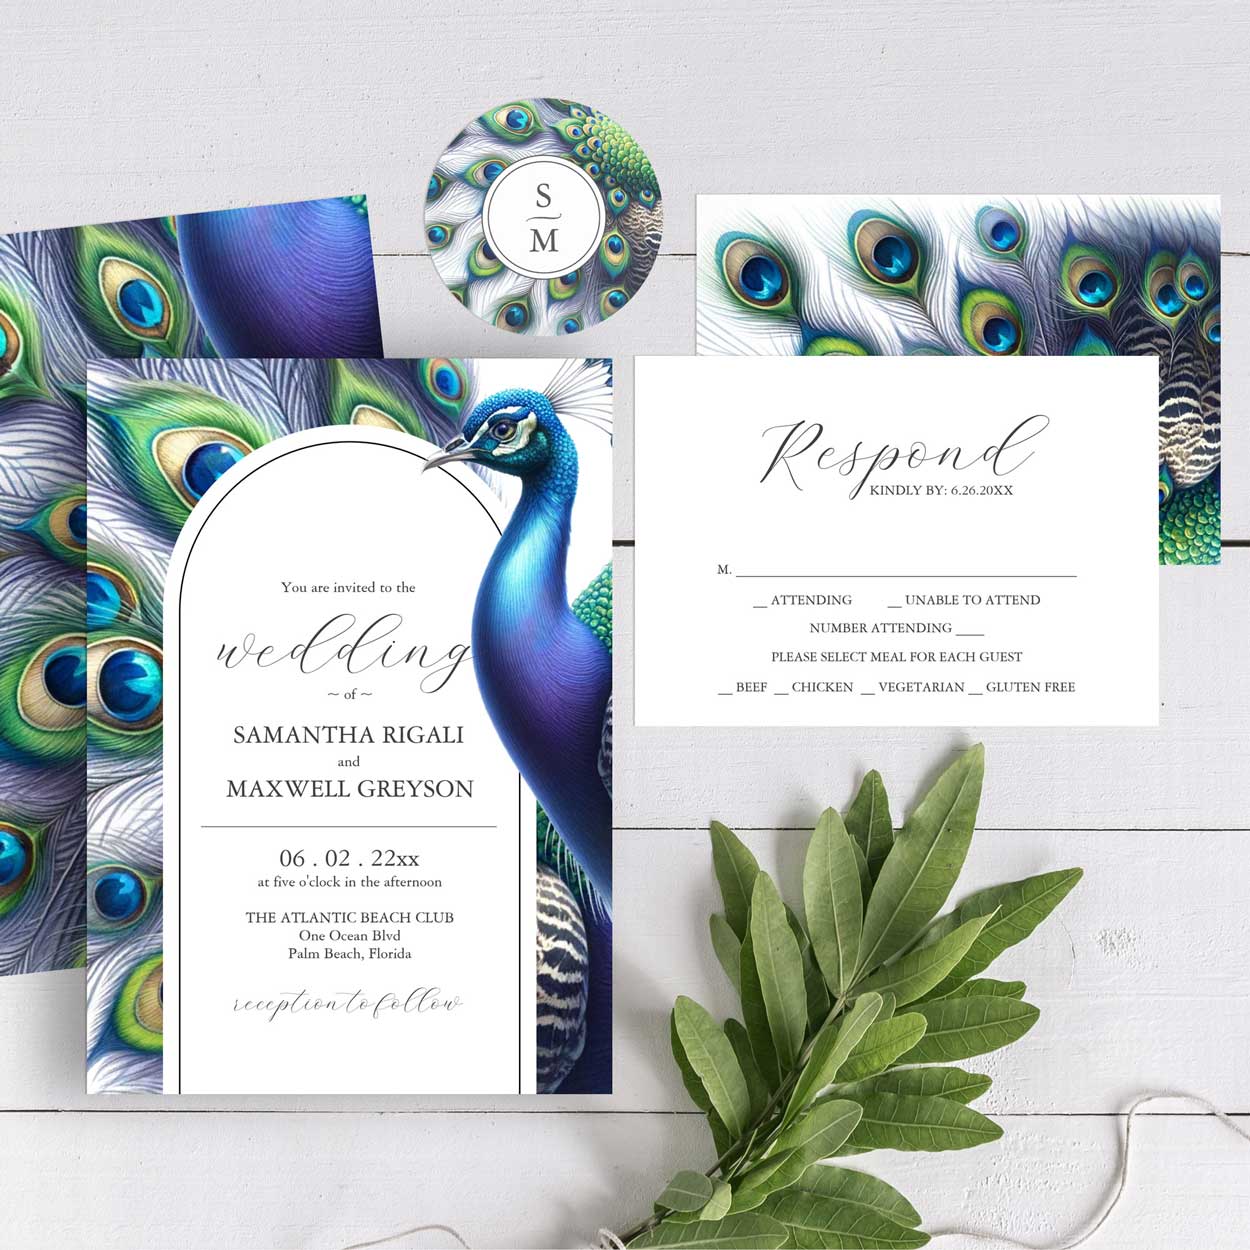 Peacock wedding invitation theme. Click to see more from this collection on Zazzle.